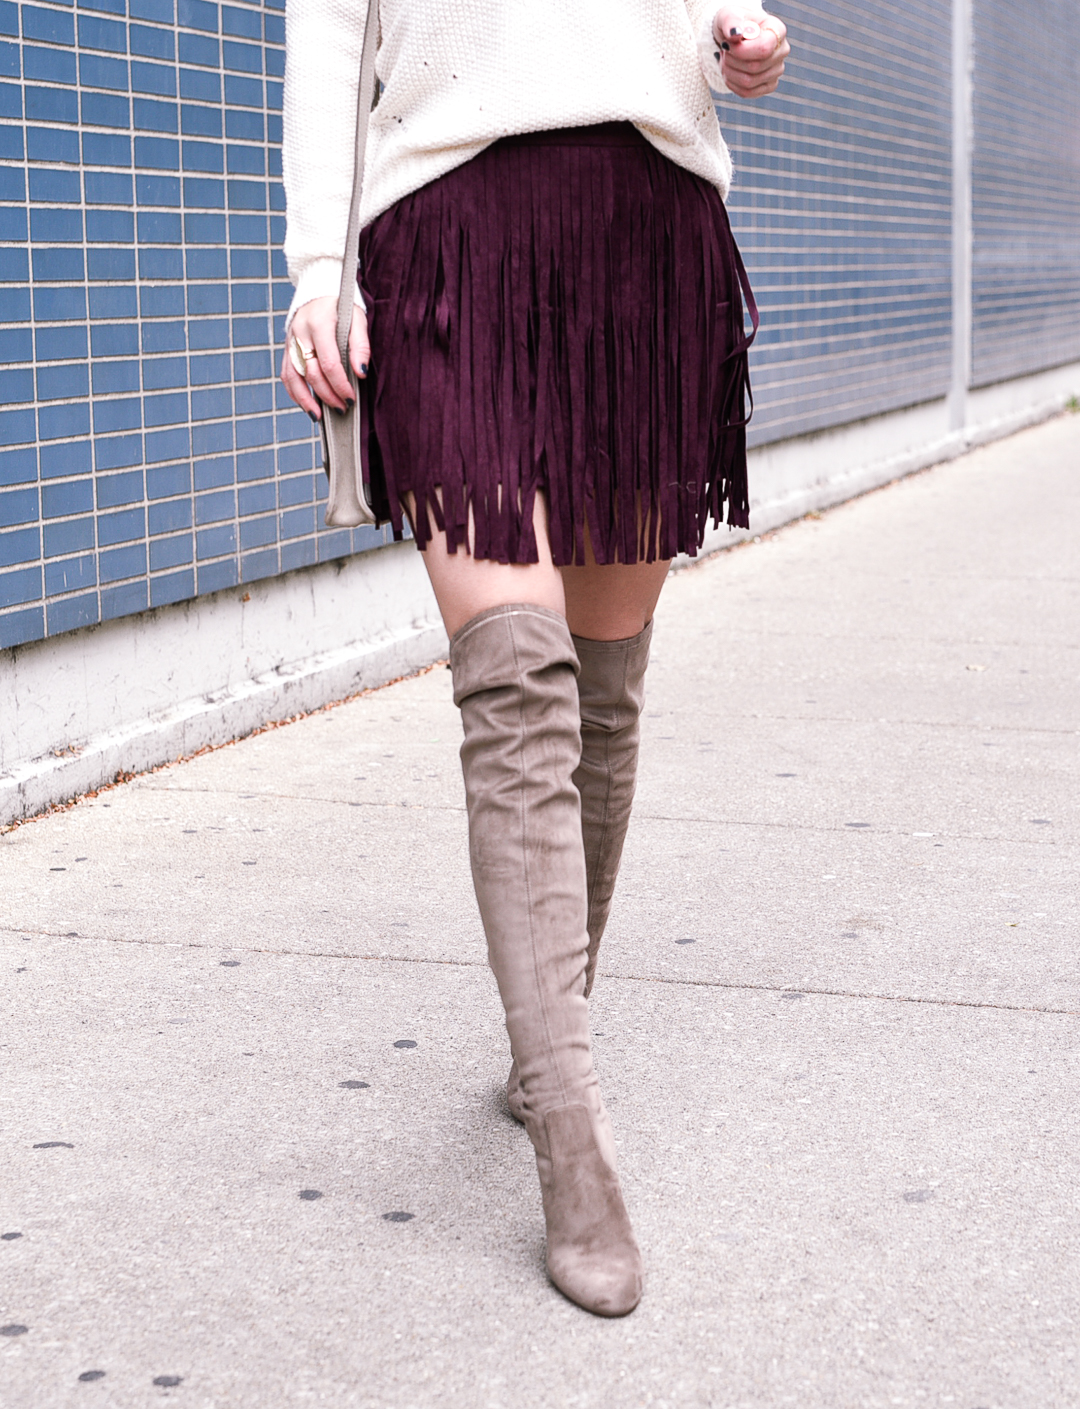 Taupe suede over the knee (otk) boots and a burgundy mini skirt with fringe detail! 